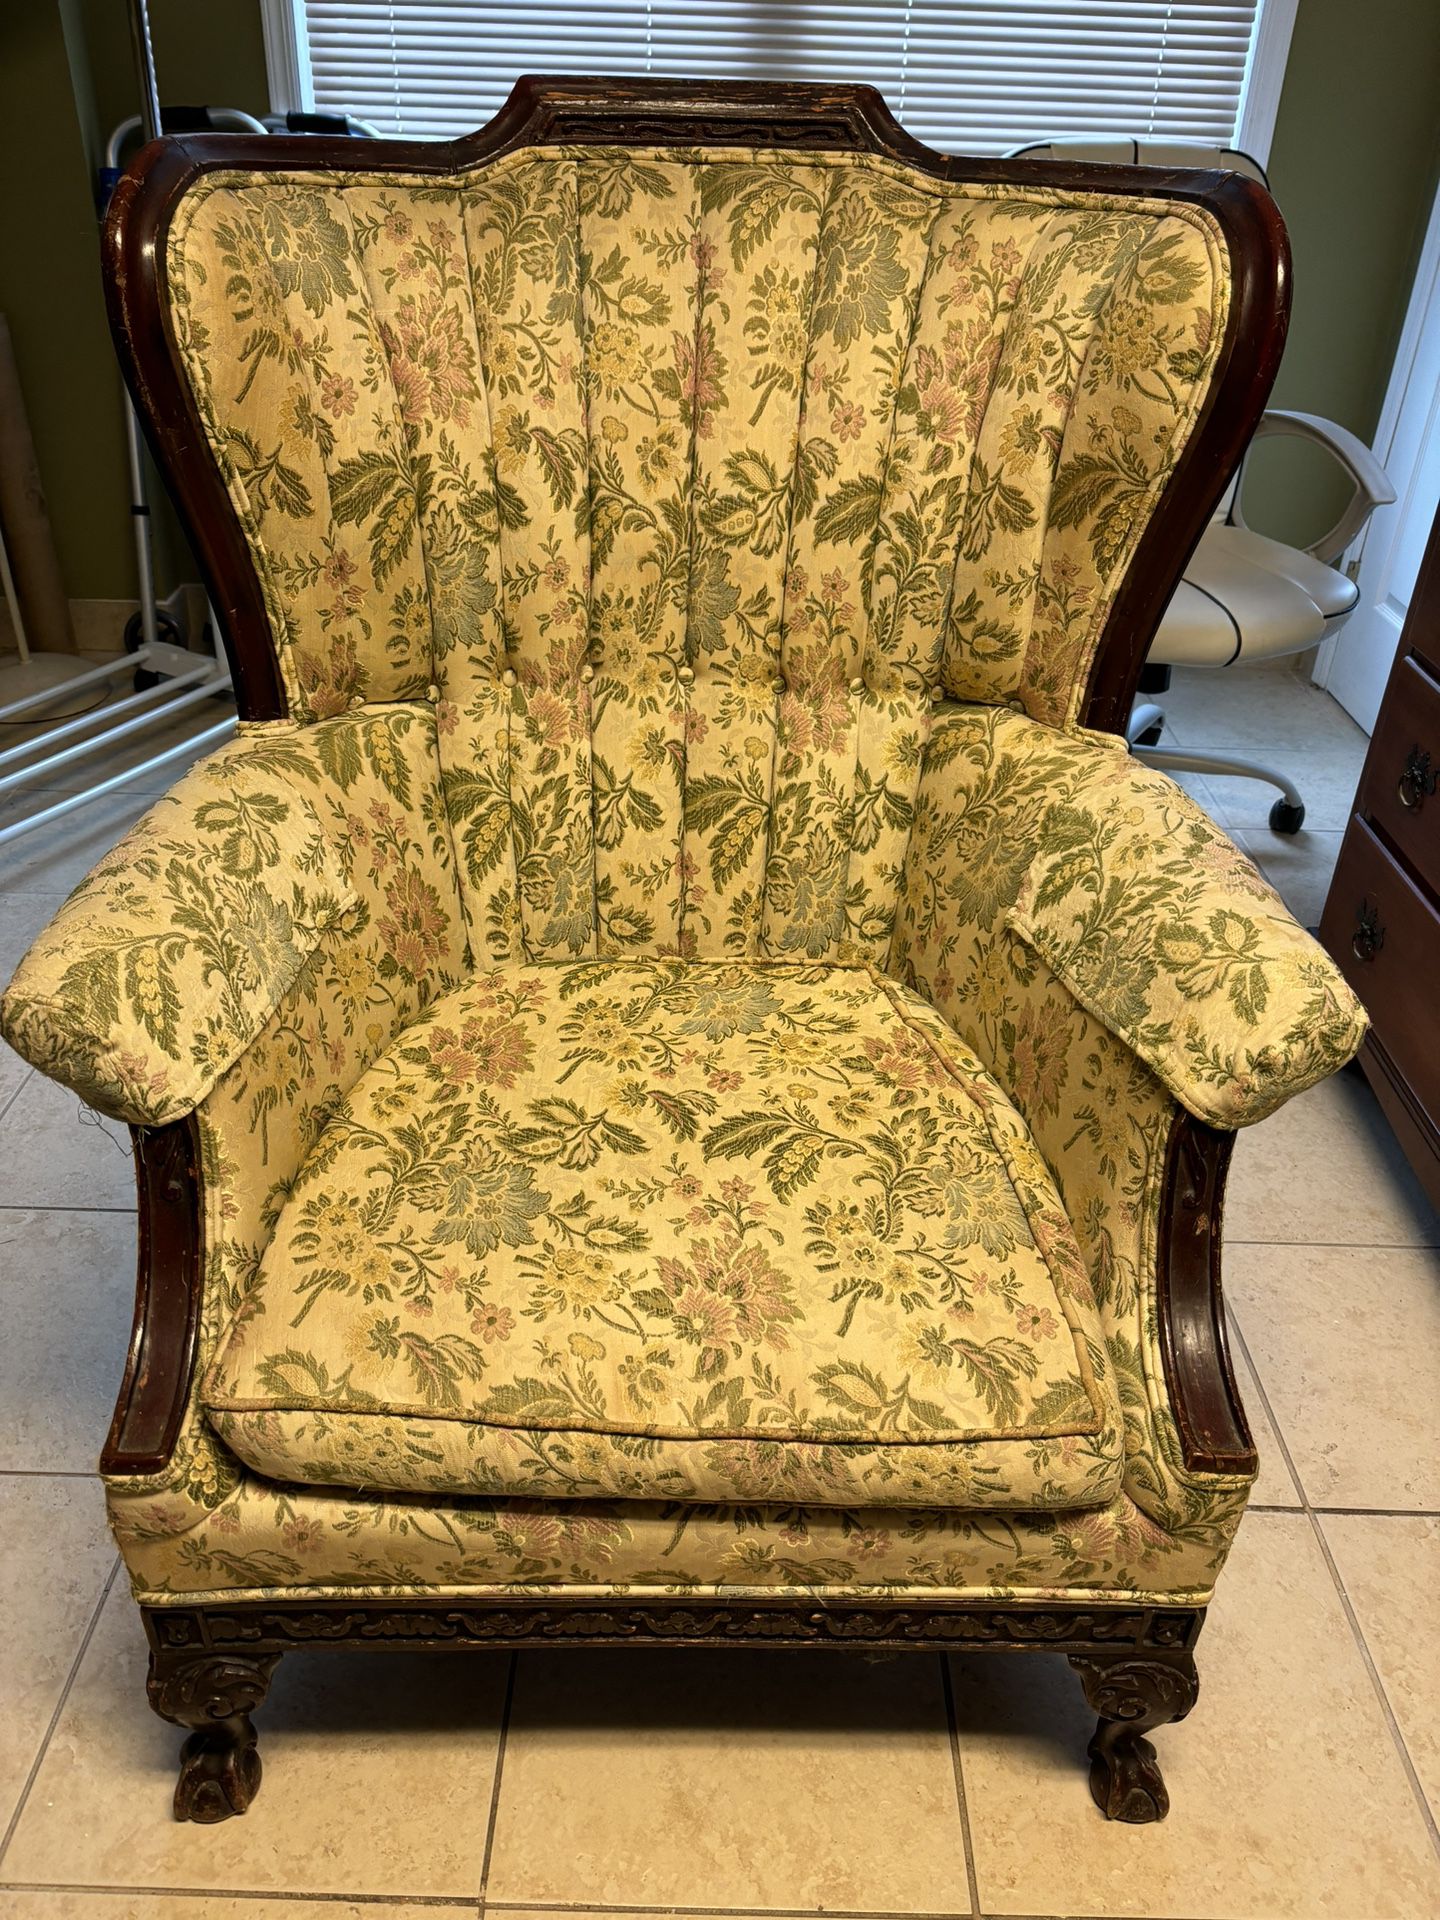 Old Reupholstery Chair  $100 B/O